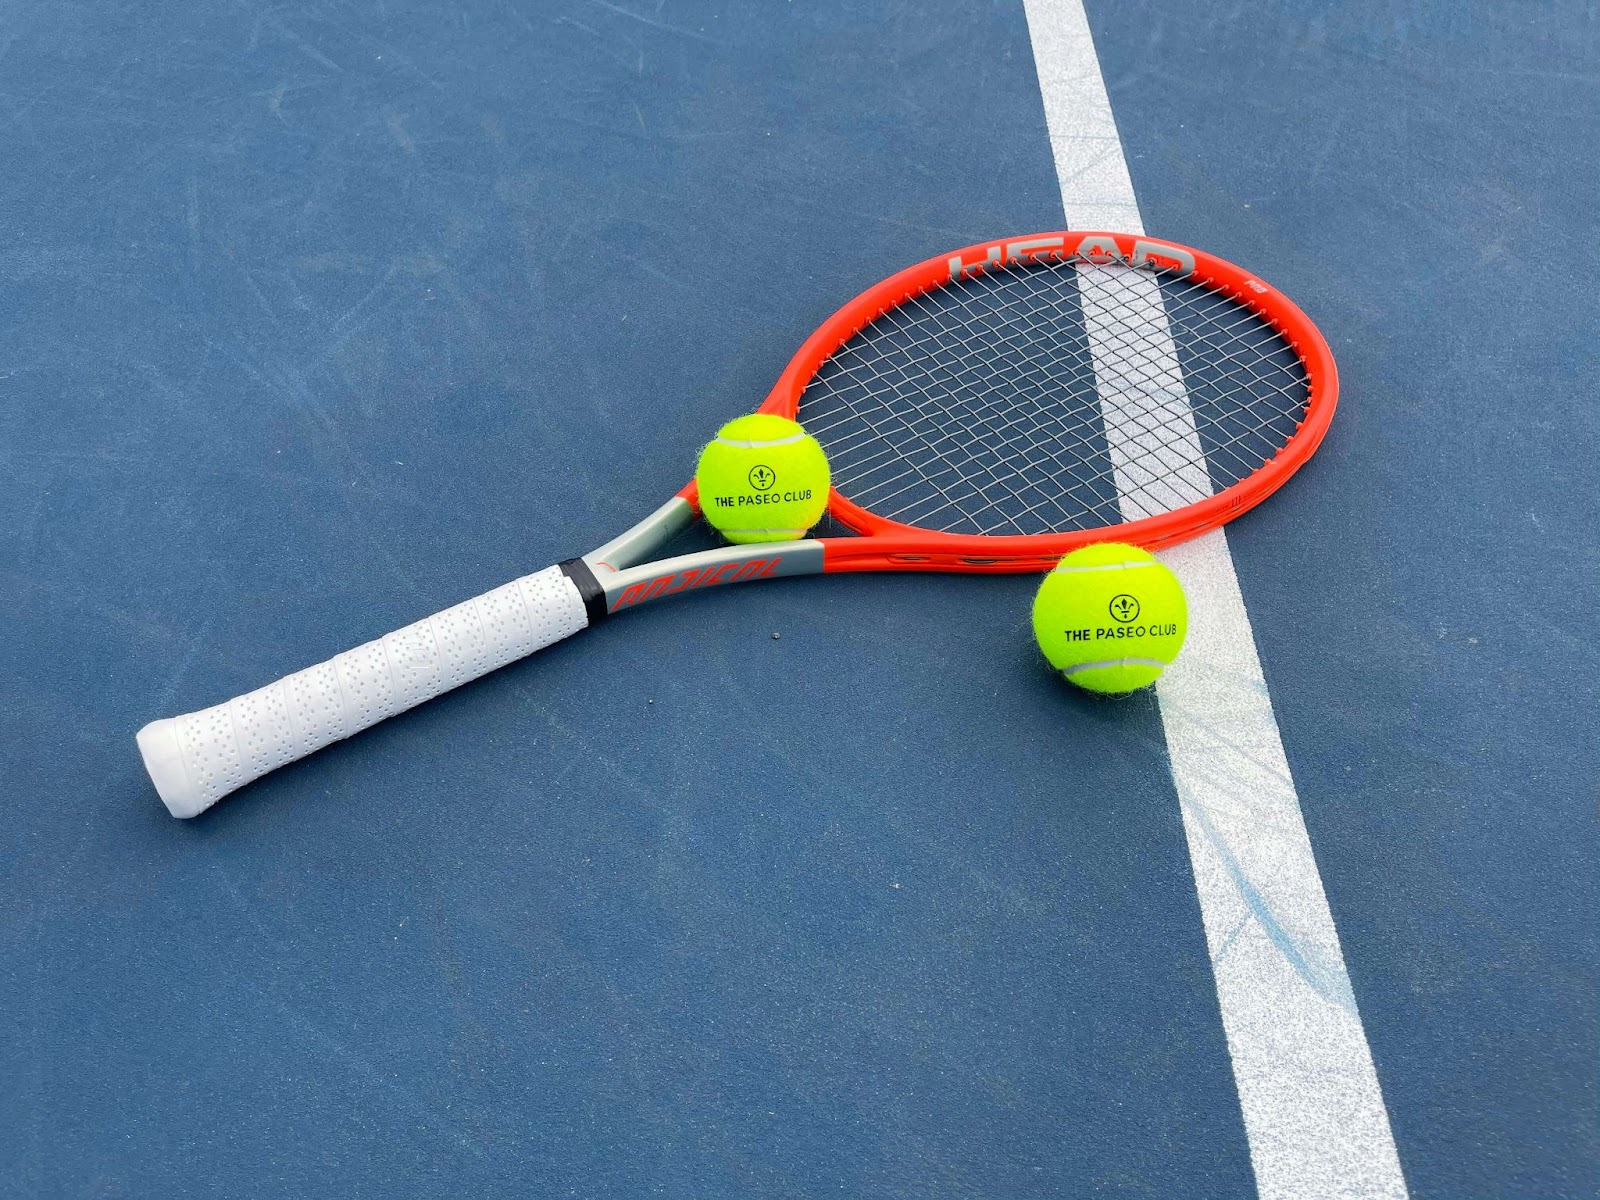 How to winterize for tennis in the Santa Clarita Valley